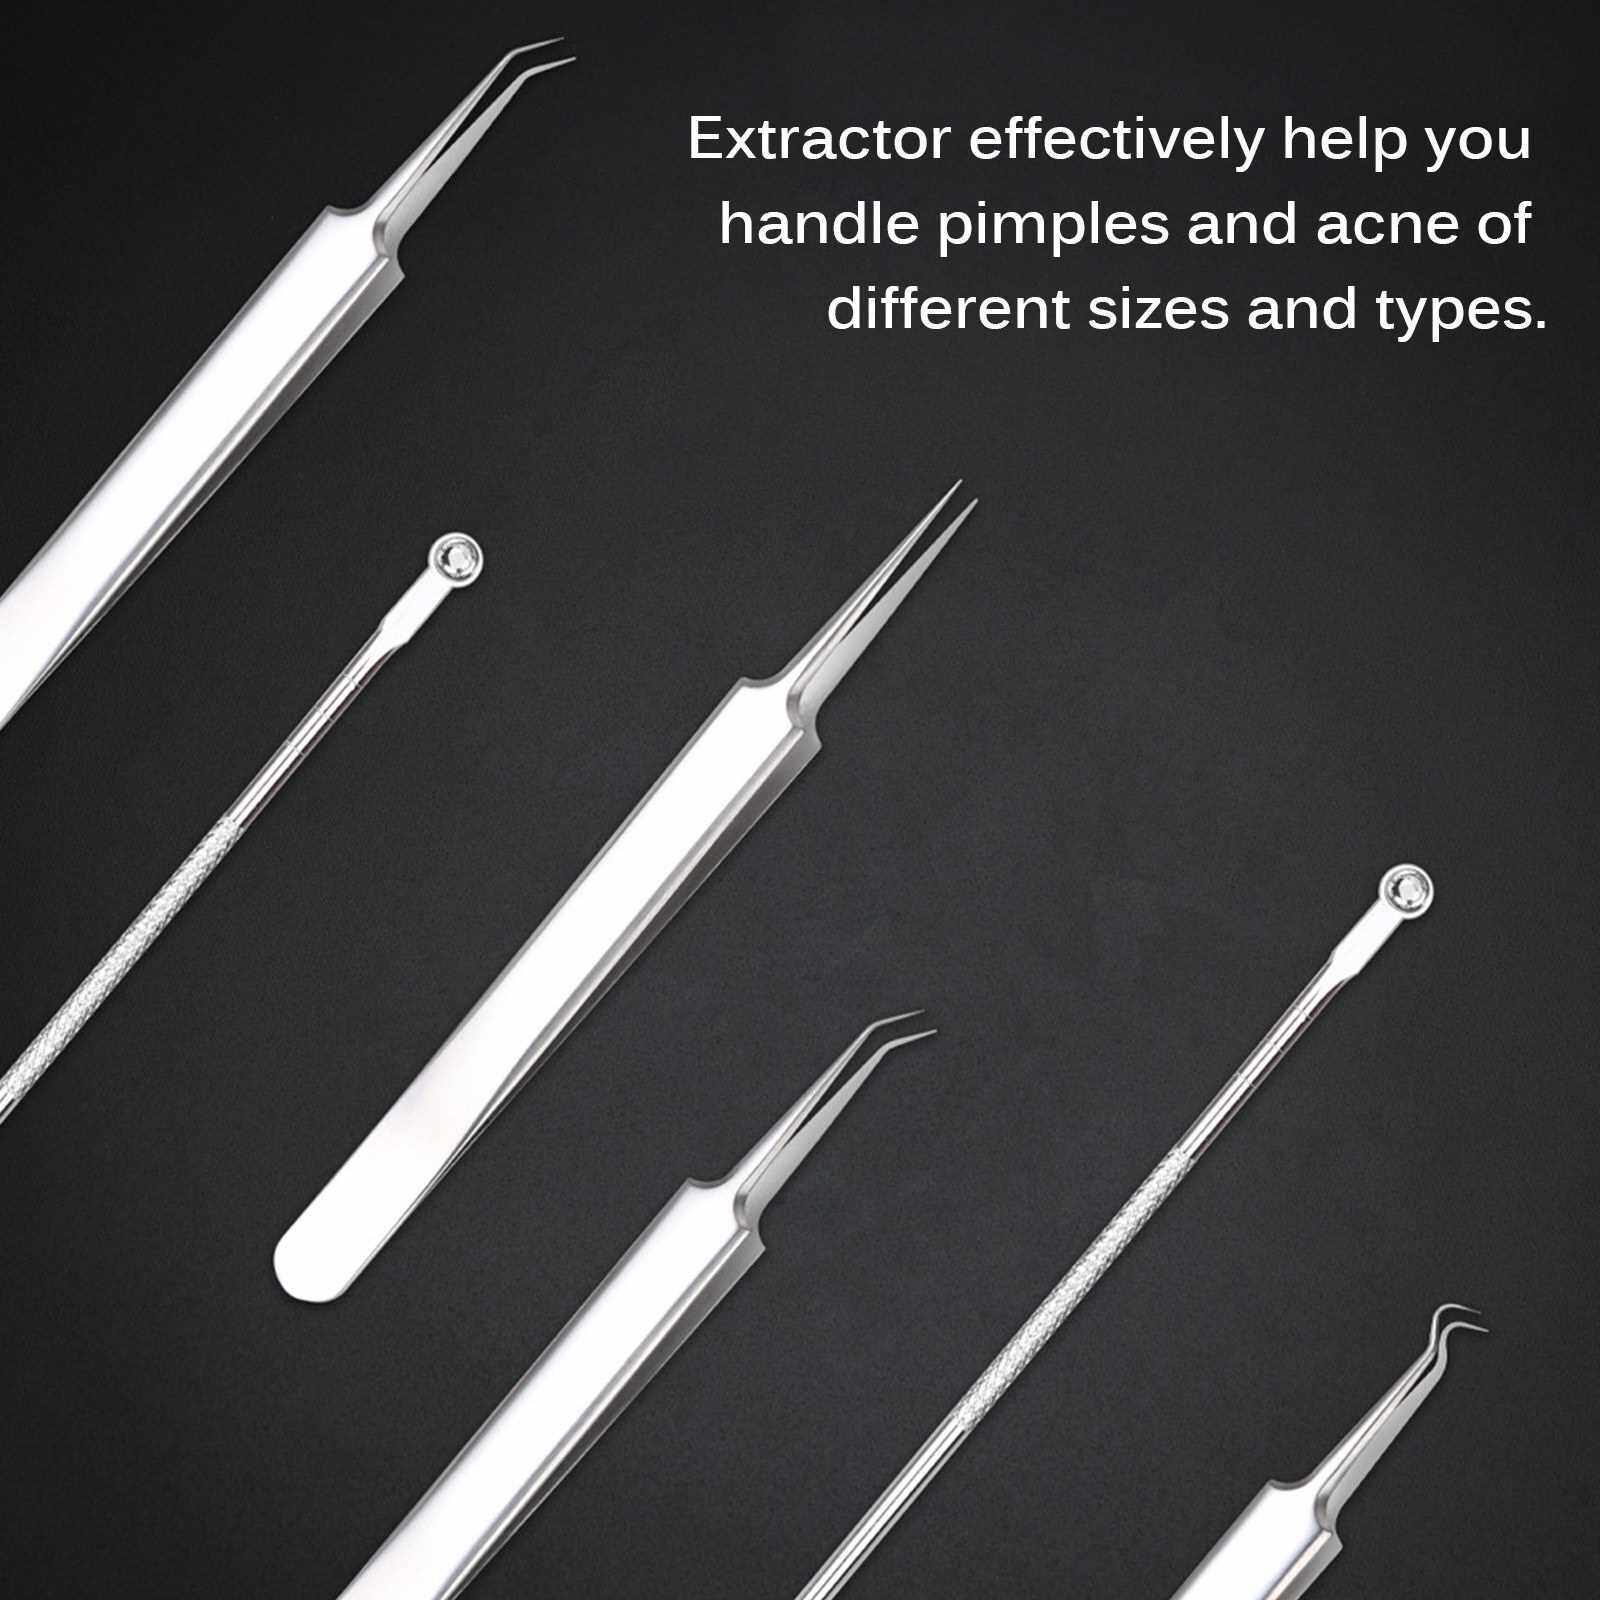 BEST SELLER 4Pcs Blackhead Remover Kit Acne Comedone Pimple Extractor Pimple Cleaner Tool Blackhead Tweezers Extractor with Storage Case (Standard)